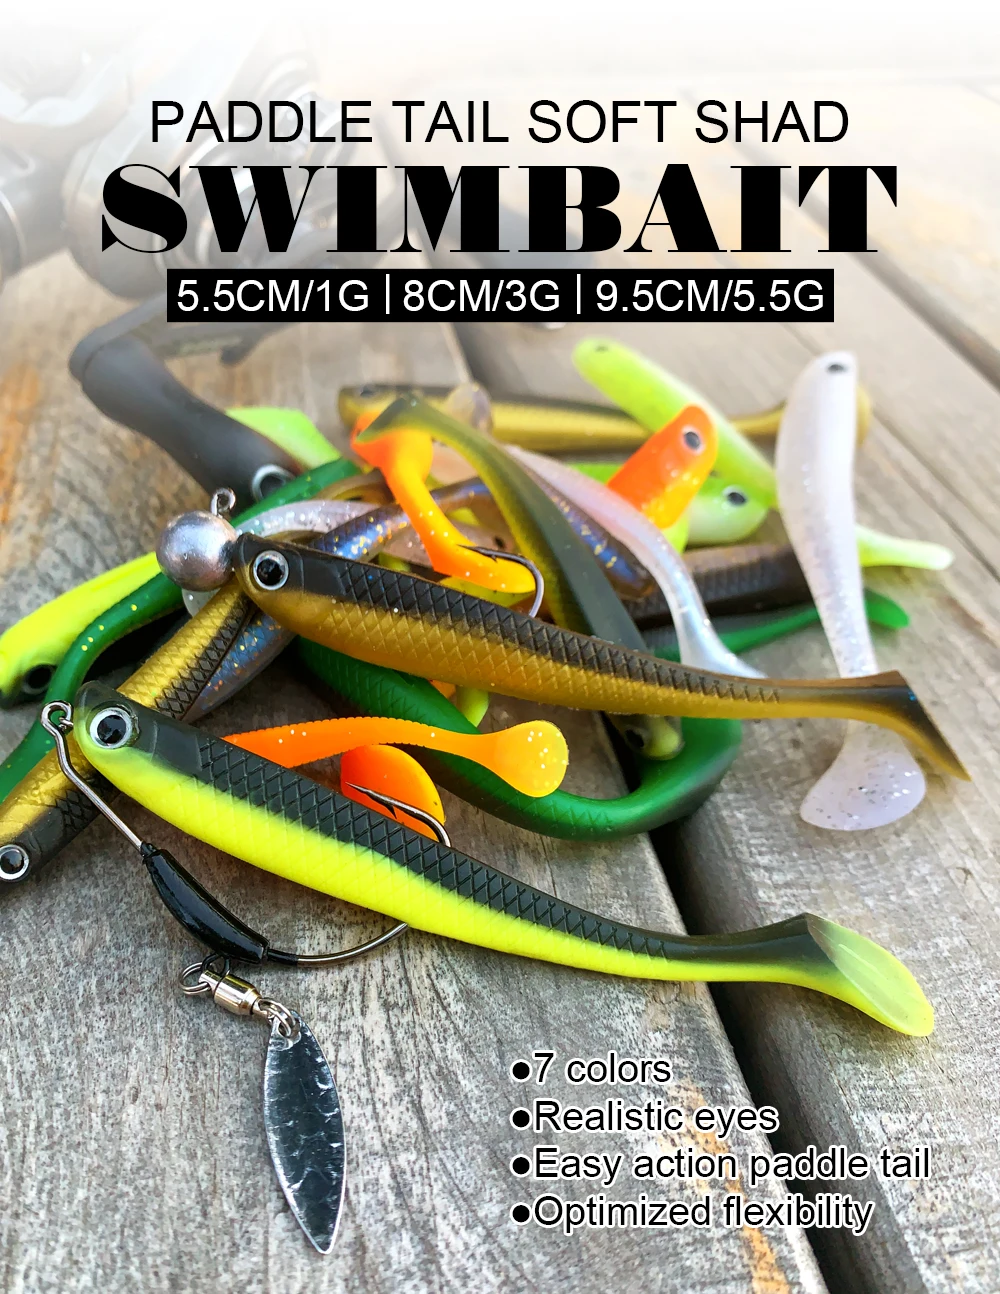 Spinpoler Soft Plastic Swimbait Fishing Lure Minnow Paddle Tail Double  Color Bass Lure For Bass Trout Crappie Panfish Bluegill - AliExpress